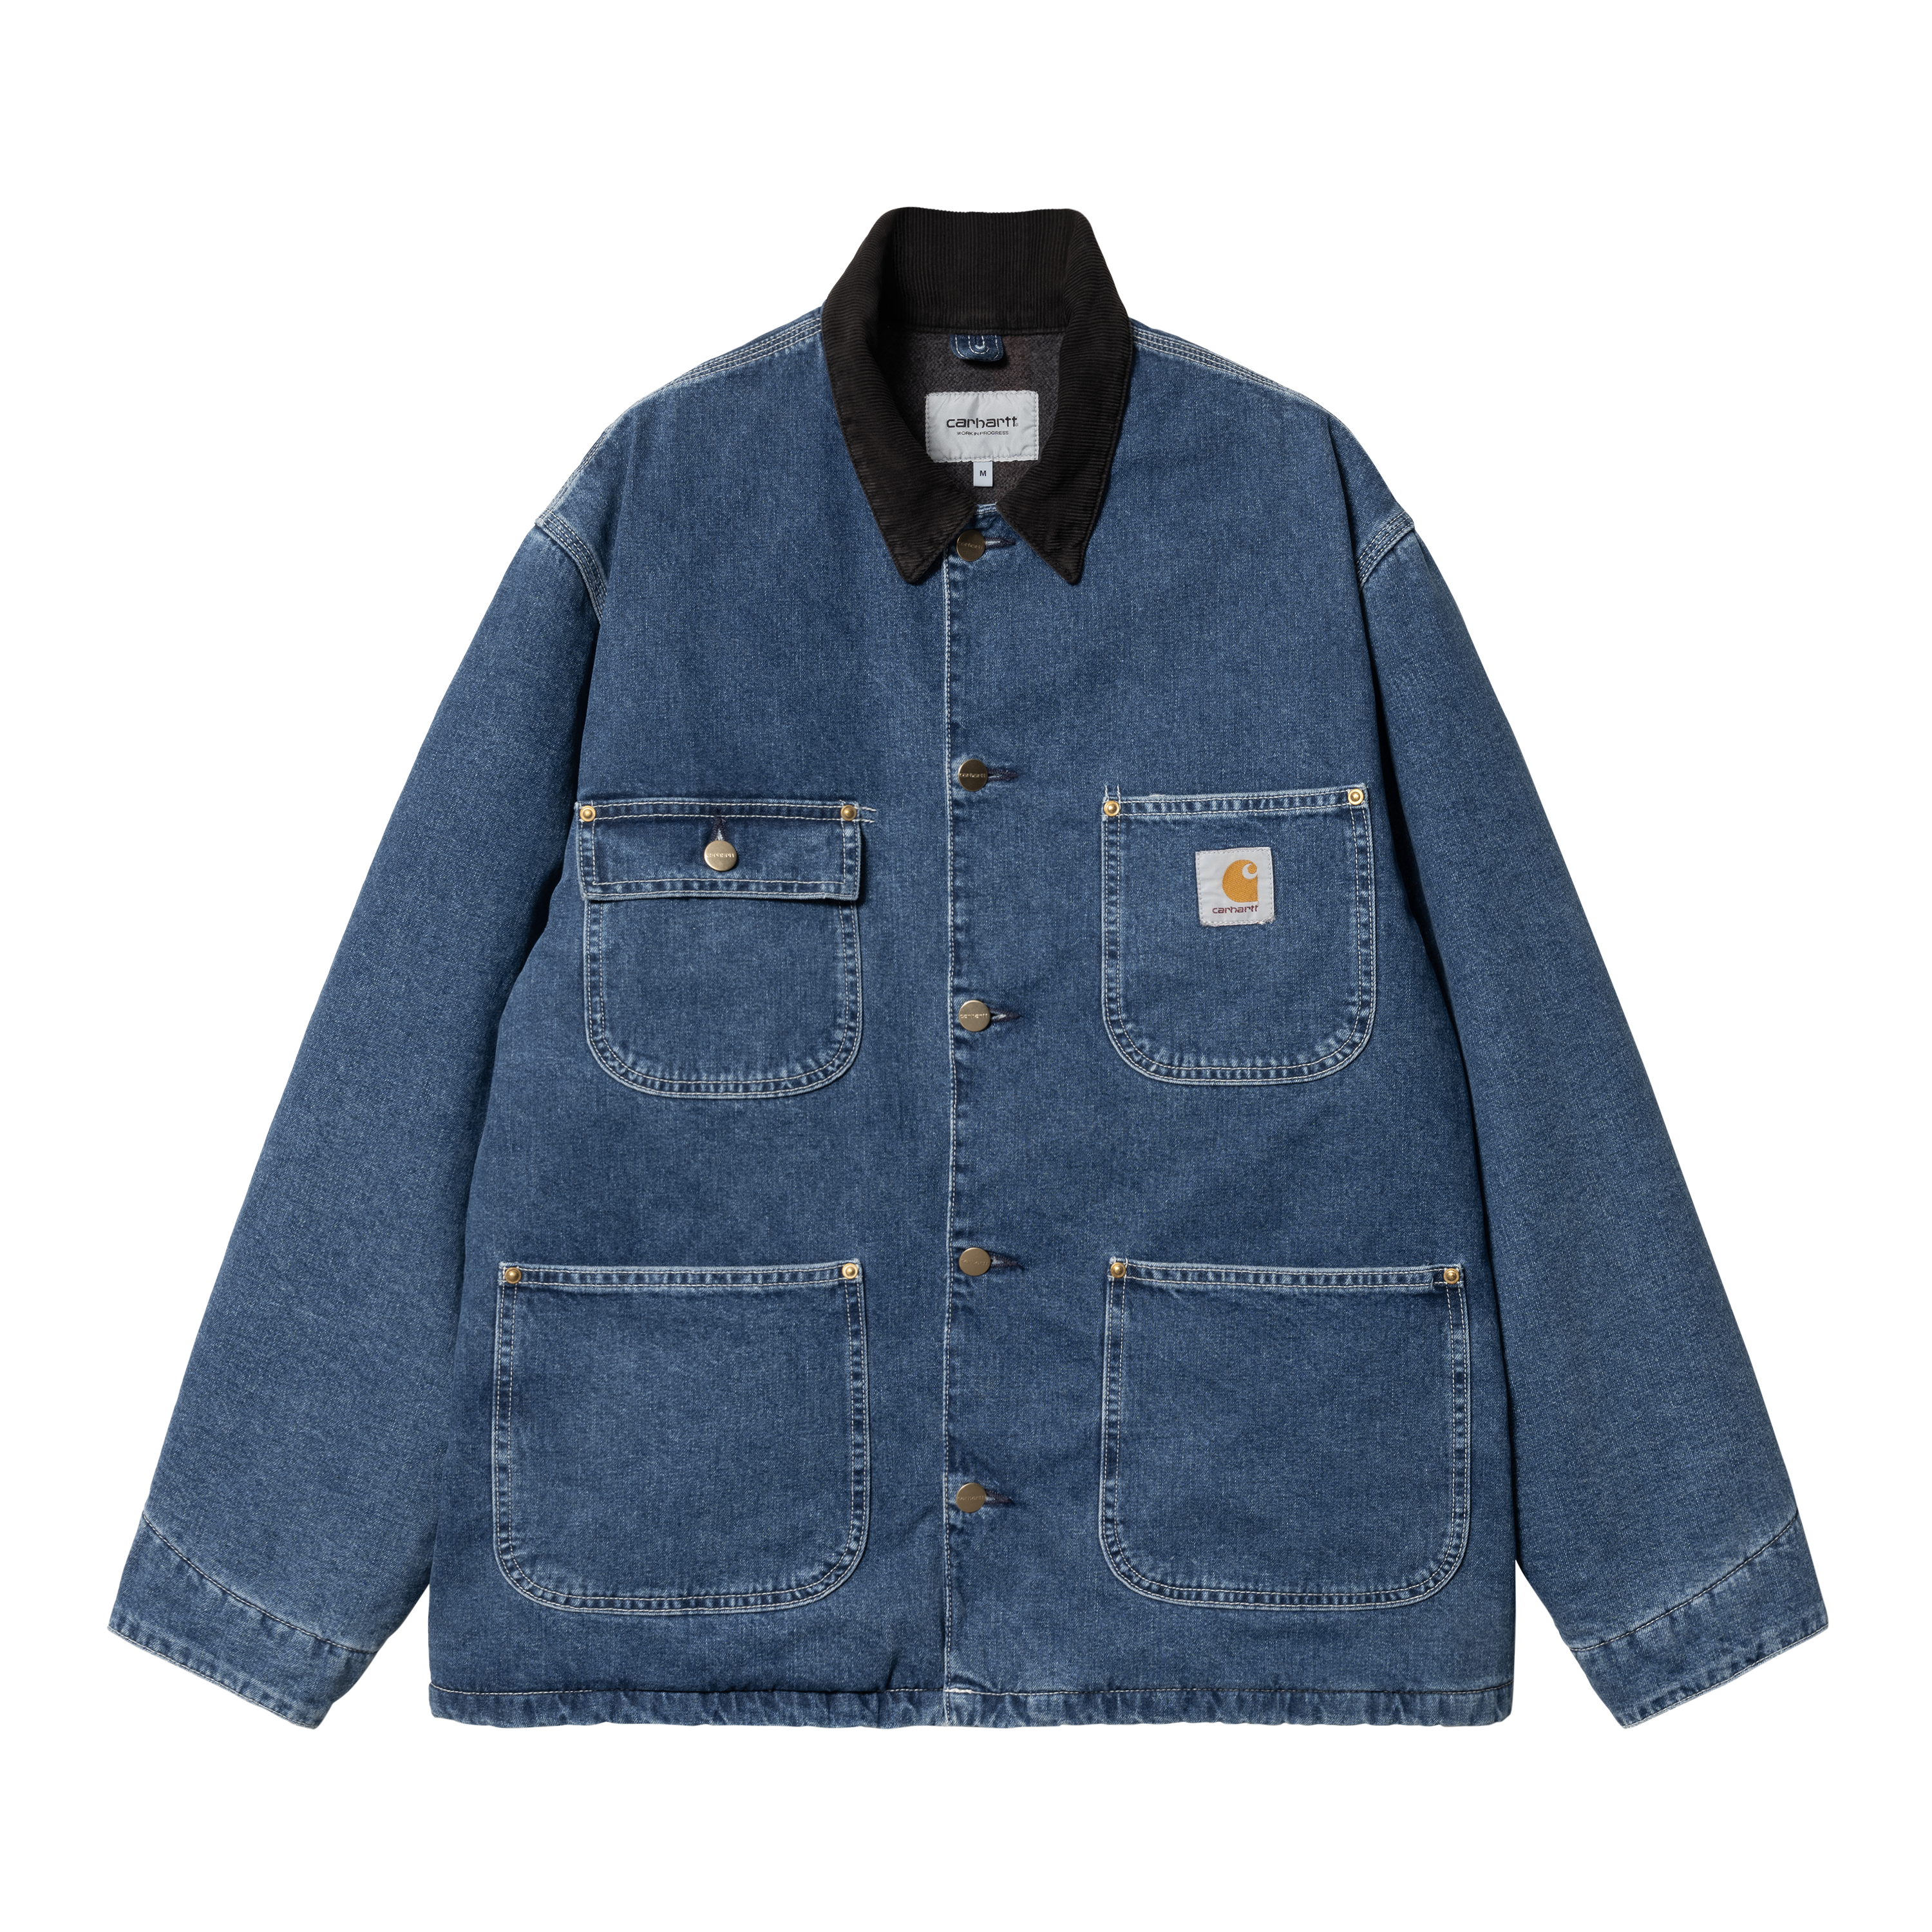 Built to Last: Carhartt Launches Reworked Resale Site, Trade-In Program